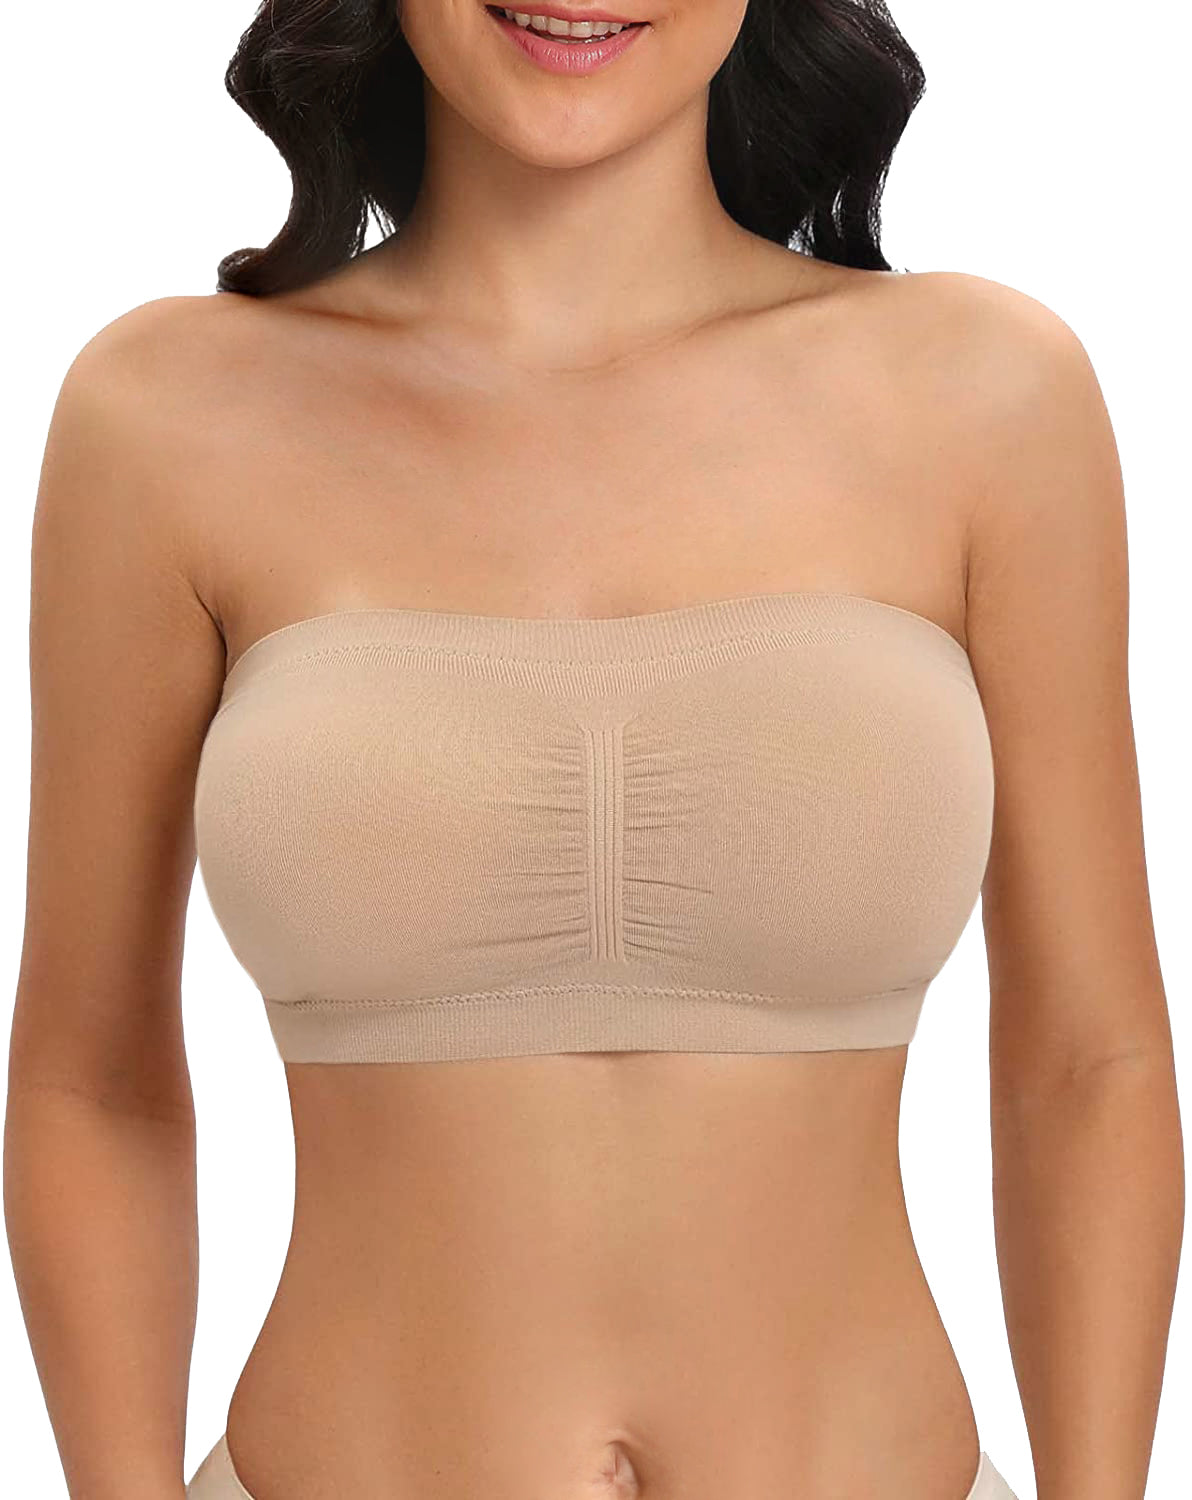 Trifolium Comfortable Seamless Bandeau Bra with Removable Pads for